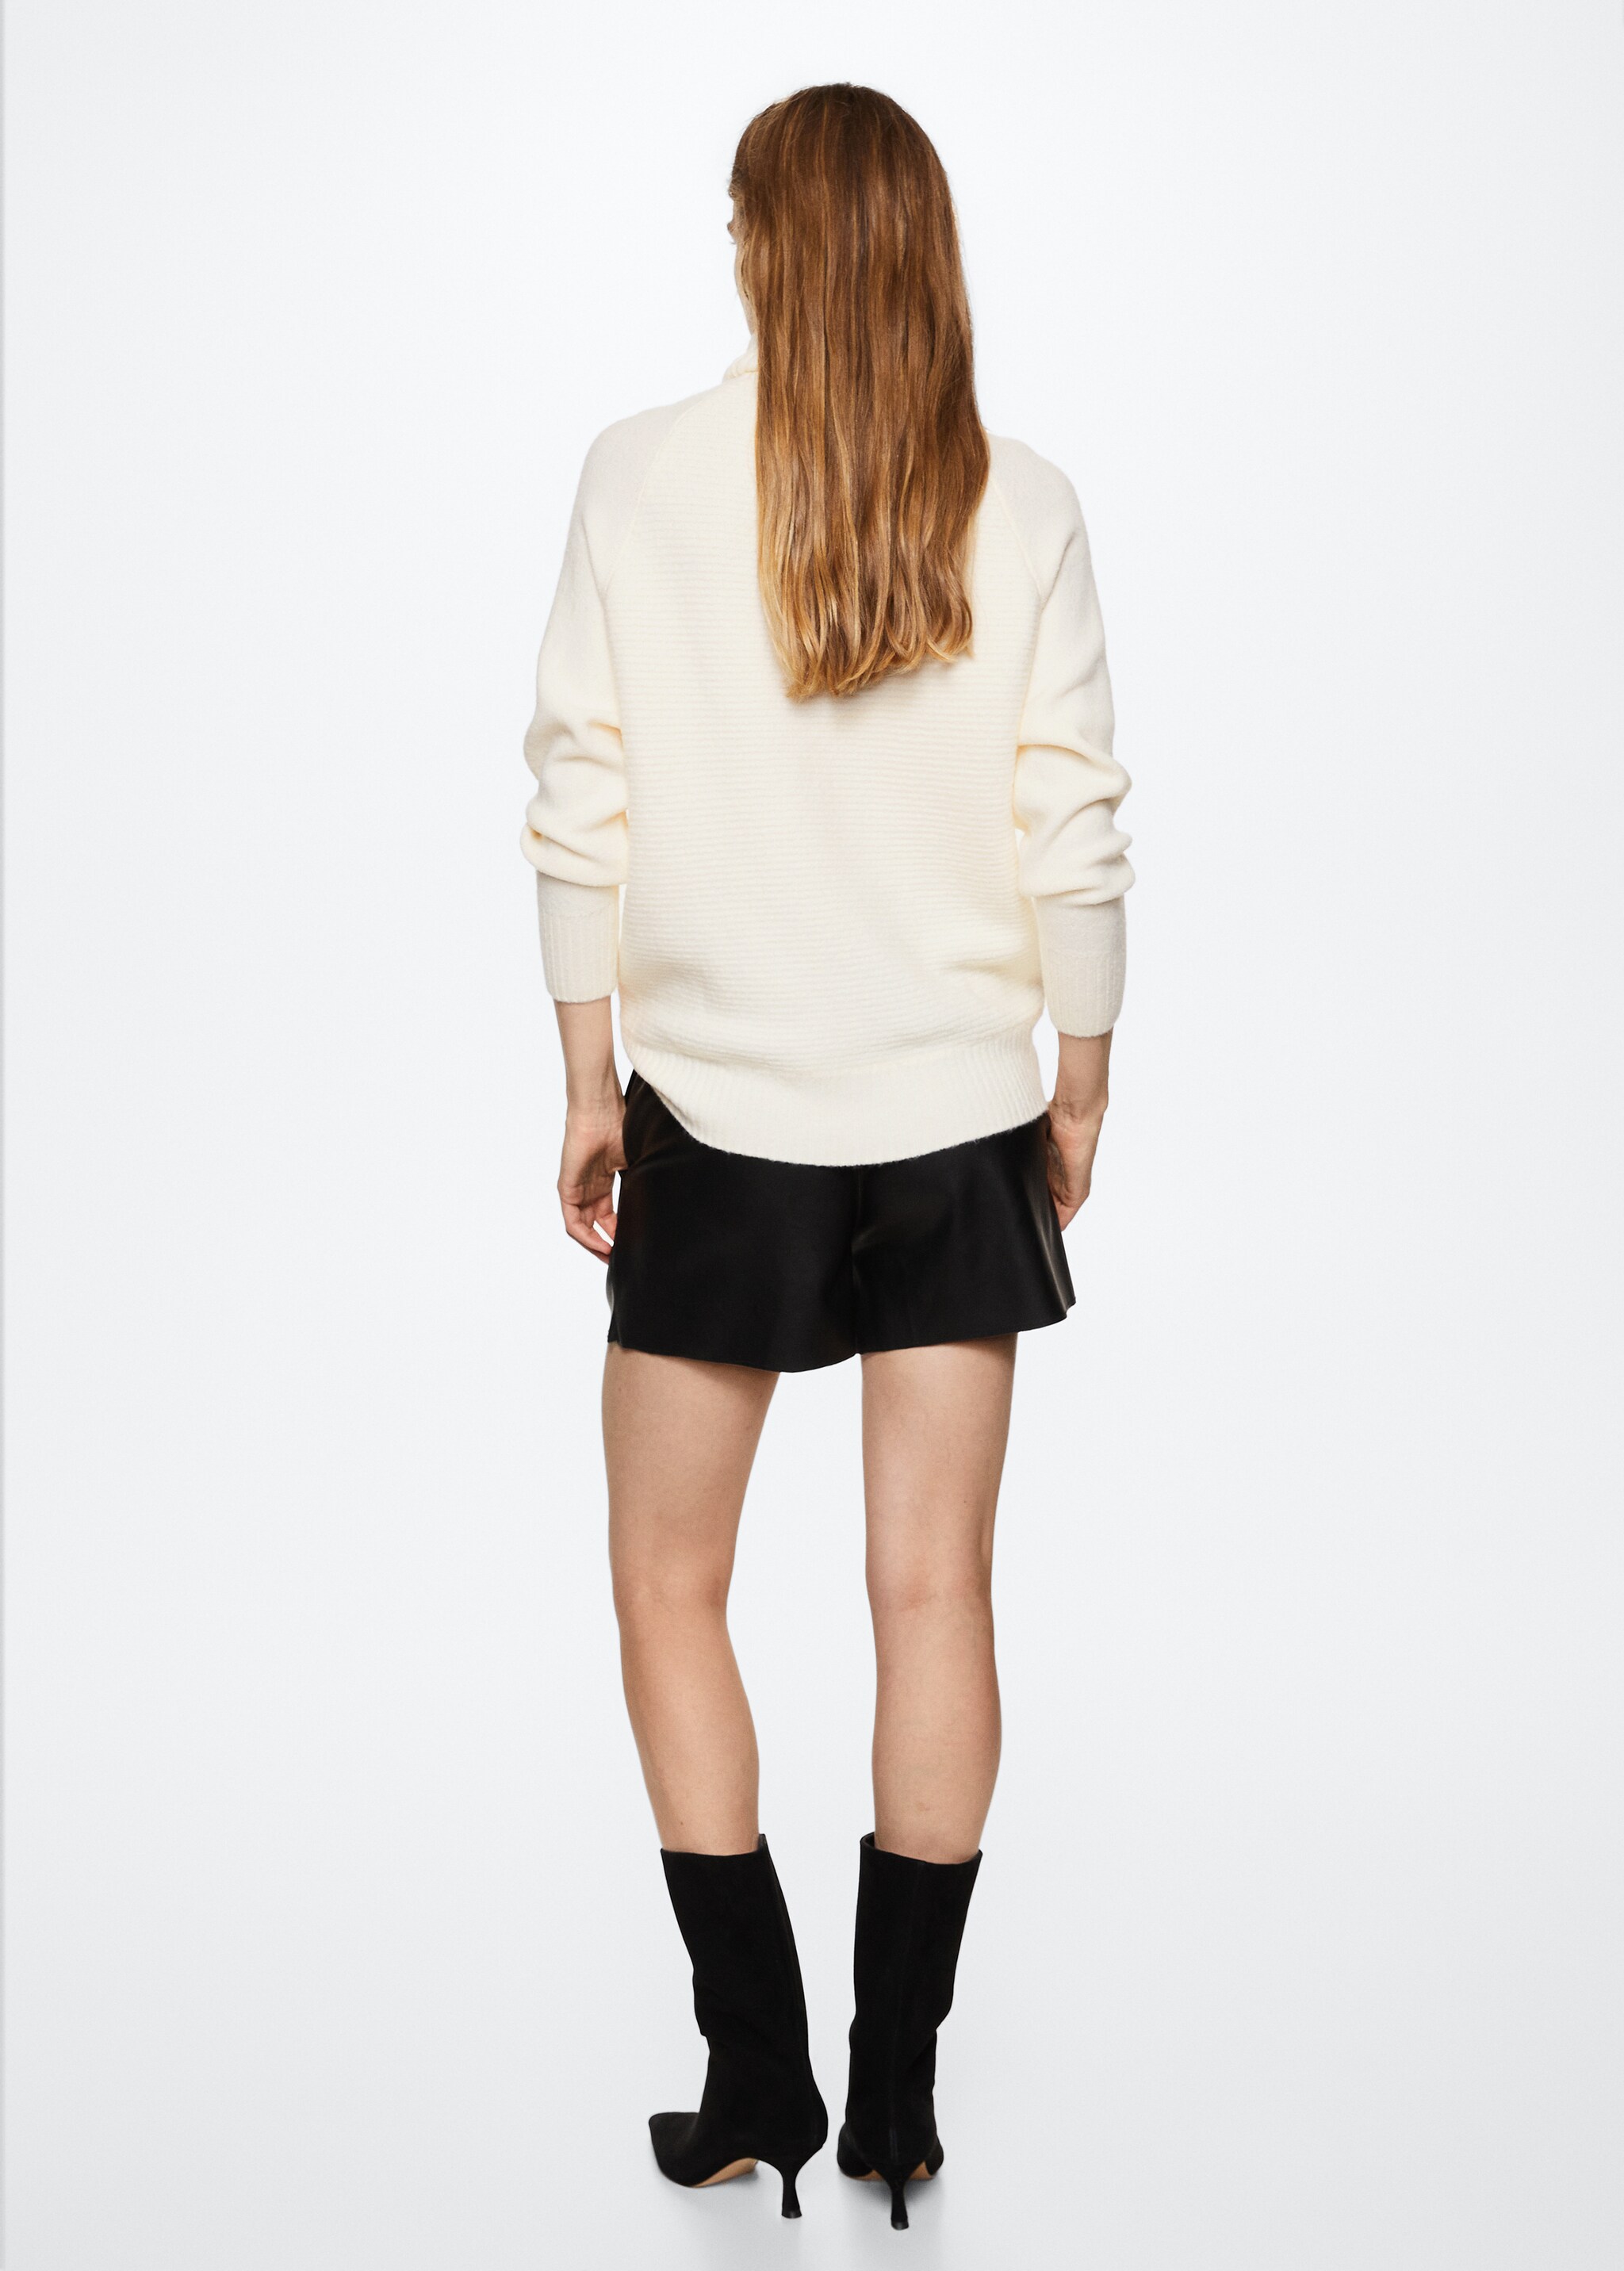 Turtle neck sweater - Reverse of the article